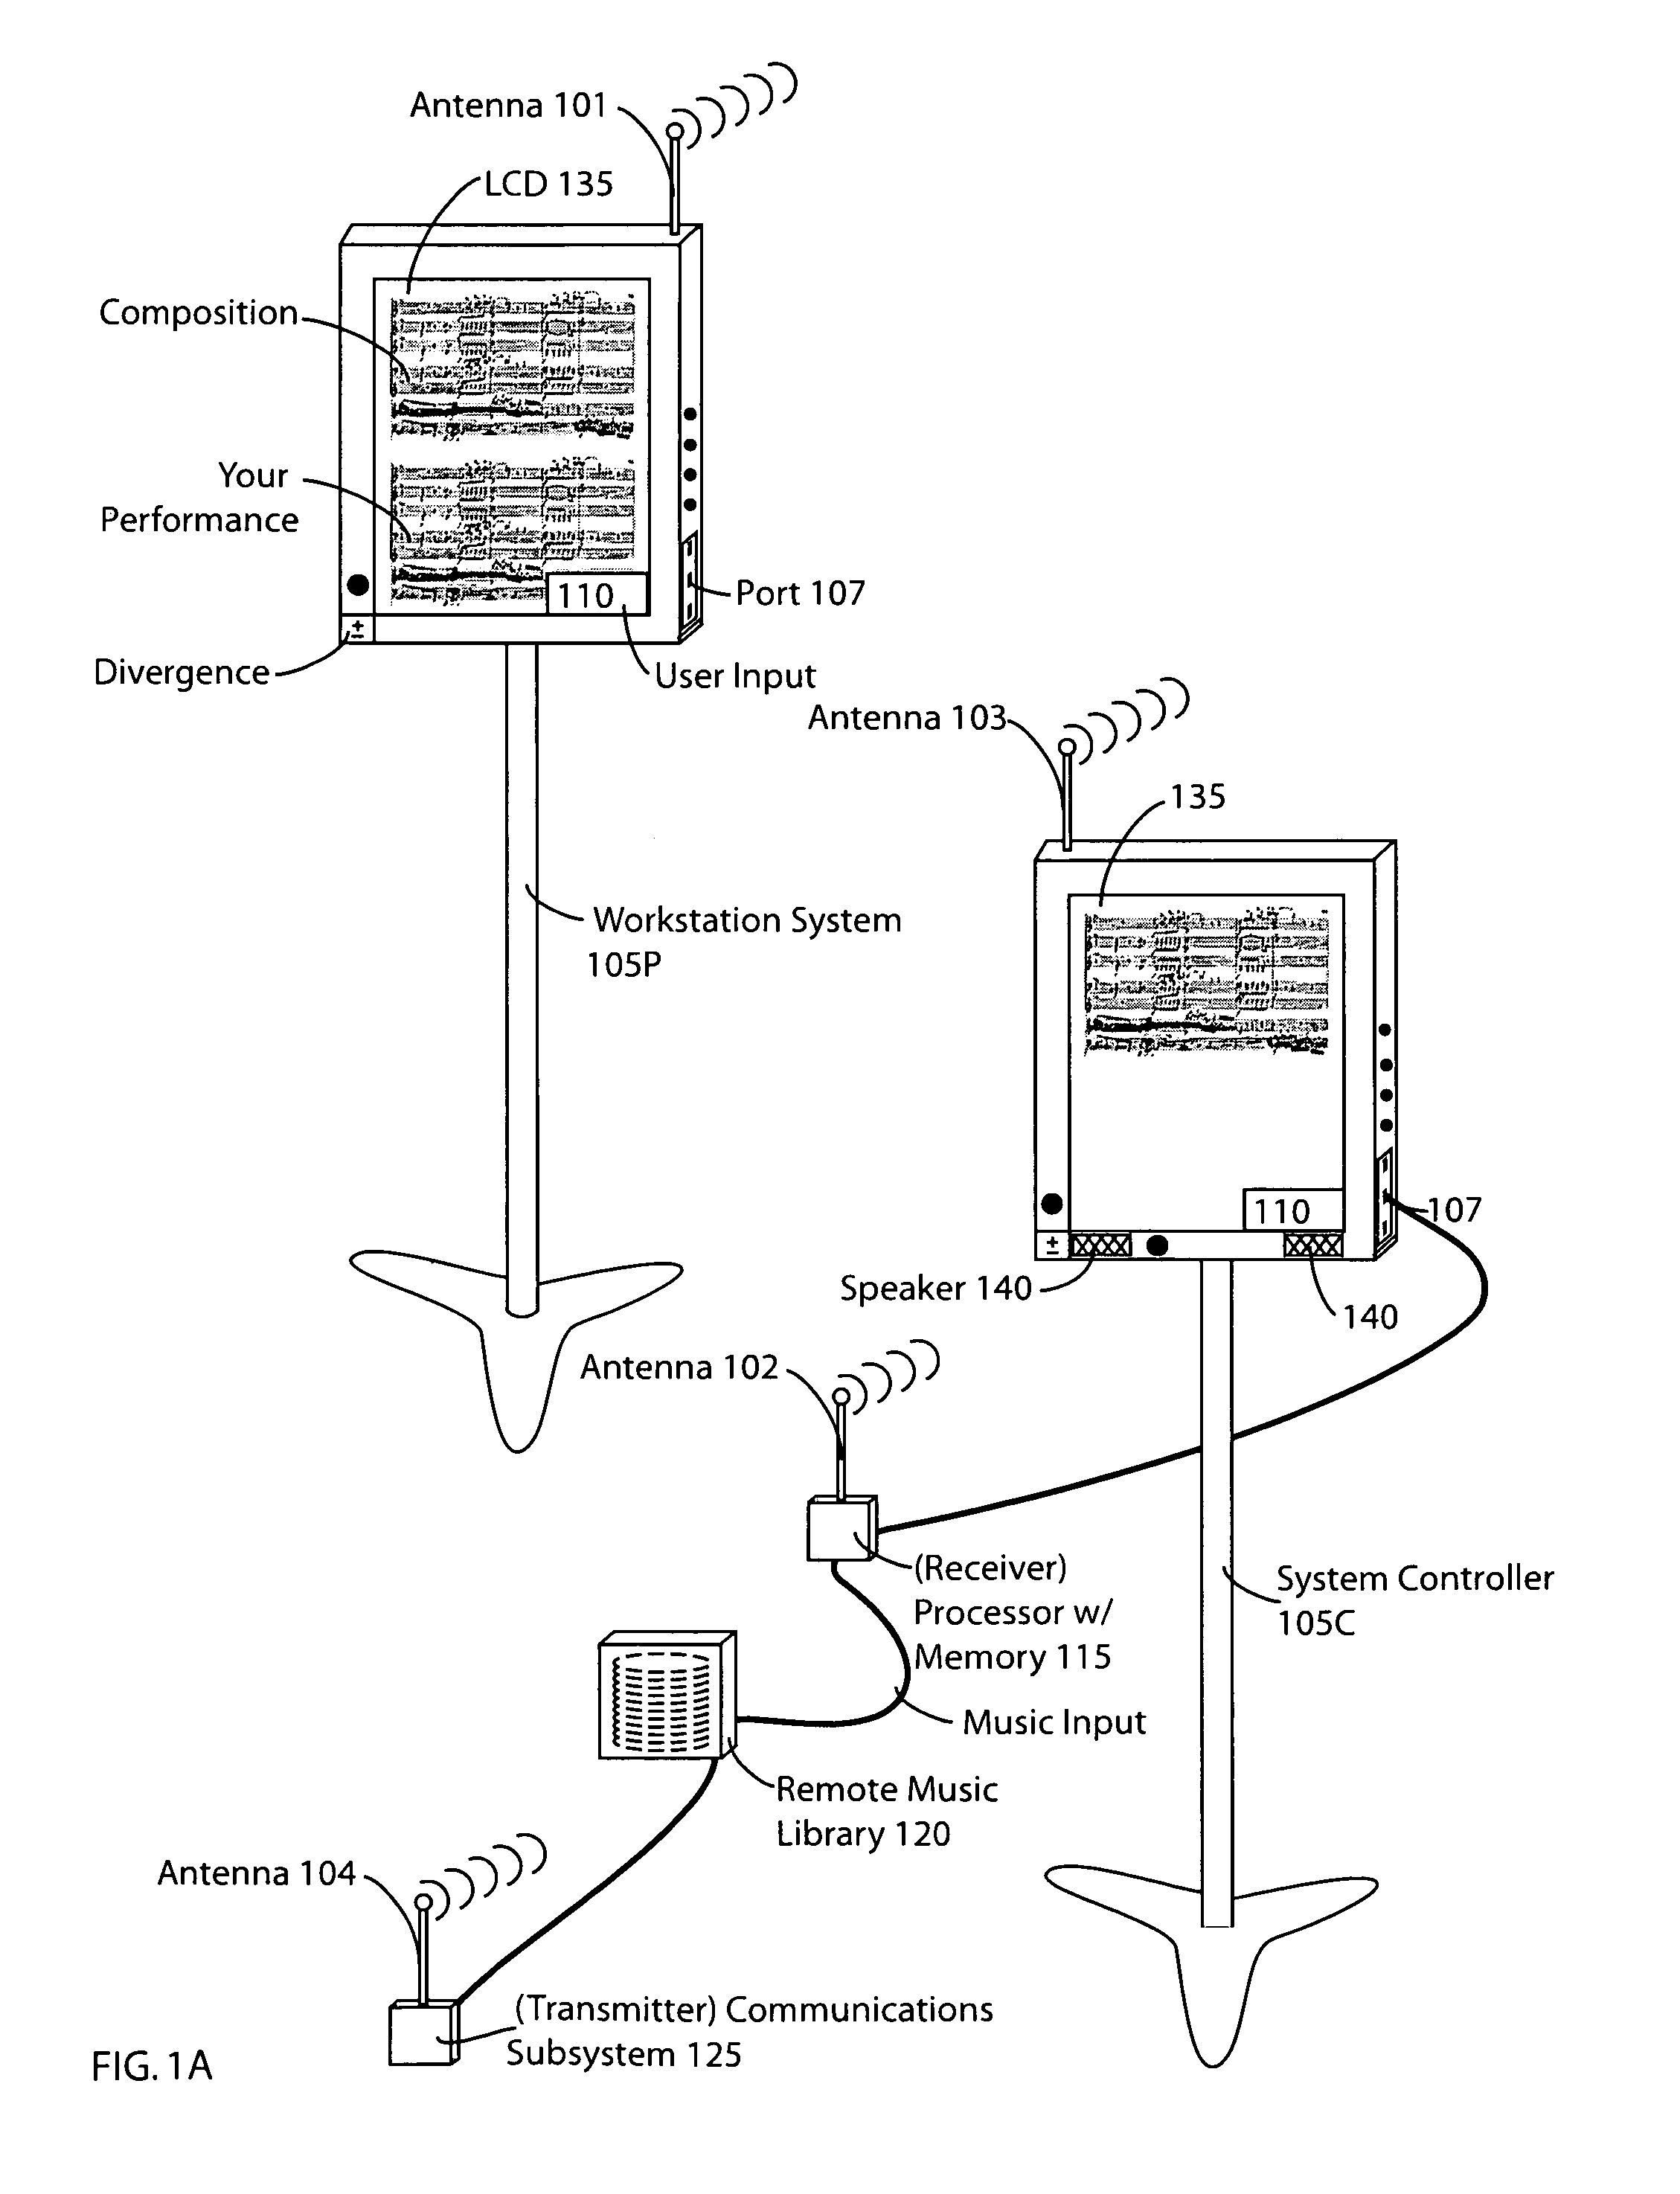 System and methodology for musical communication and display